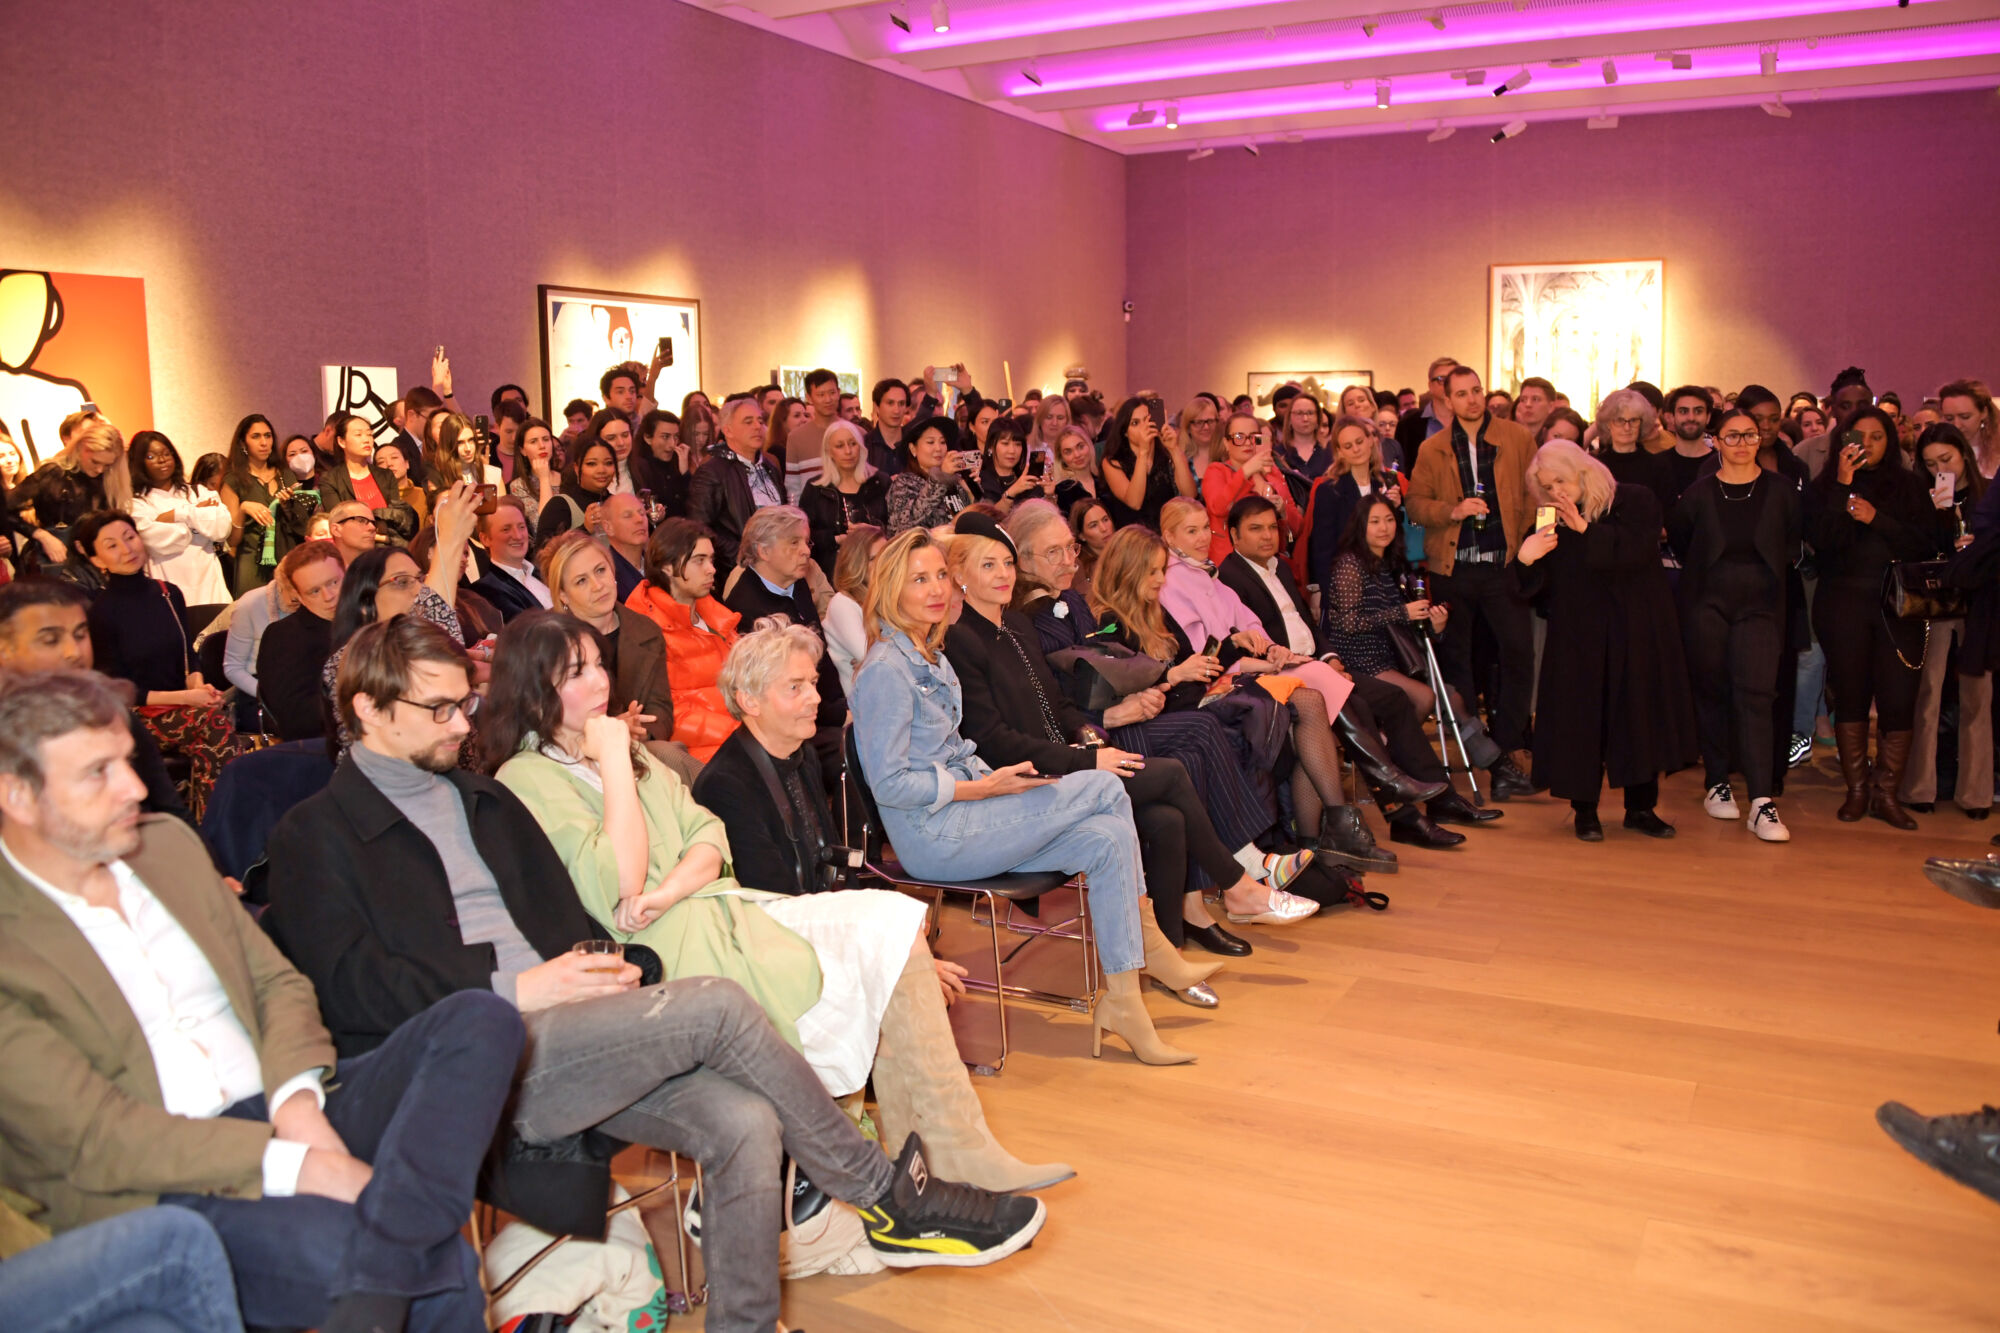 The Wick - “The Lobstars (Genesis)” at Bonhams After Hours with a panel talk featuring British artist Philip Colbert, chart-topping musician and NFT collector Tinie Tempah, editor and author Dylan Jones and Bonhams Head of Digital Art at Bonhams Nima Sagharchi at Bonhams, March 2022